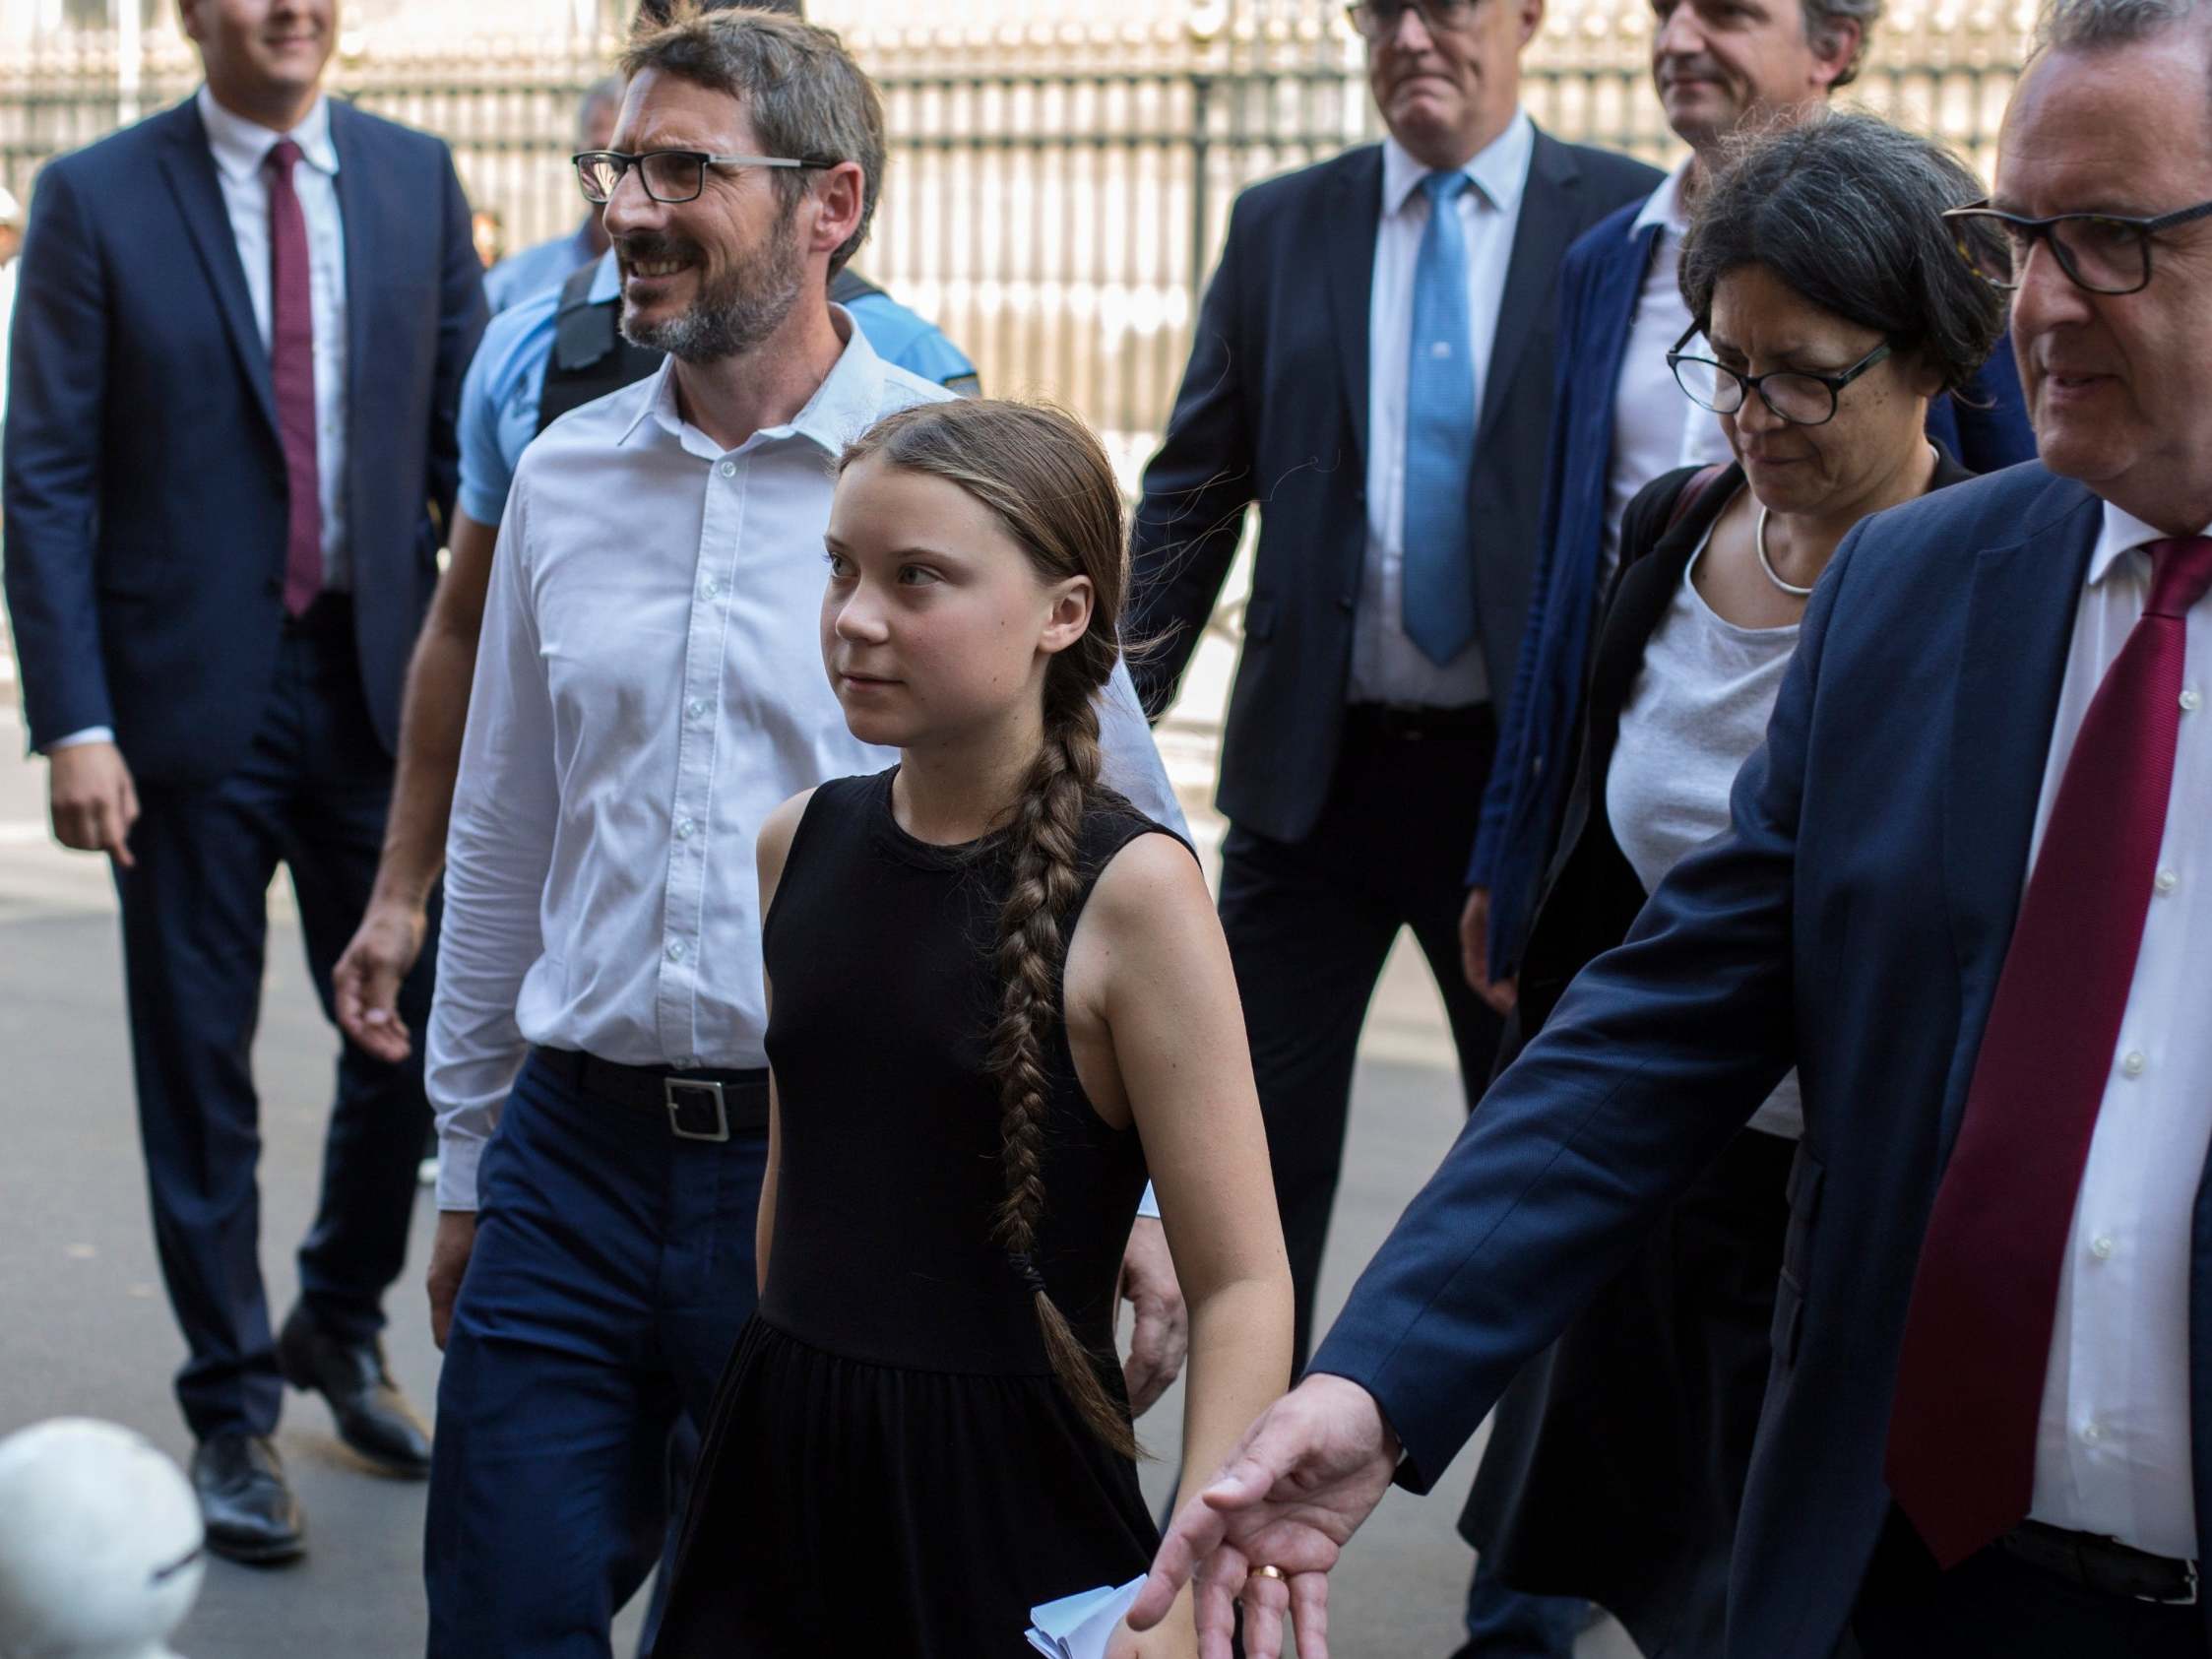 Greta Thunberg arrives for her meeting in the French National Assembly in Paris